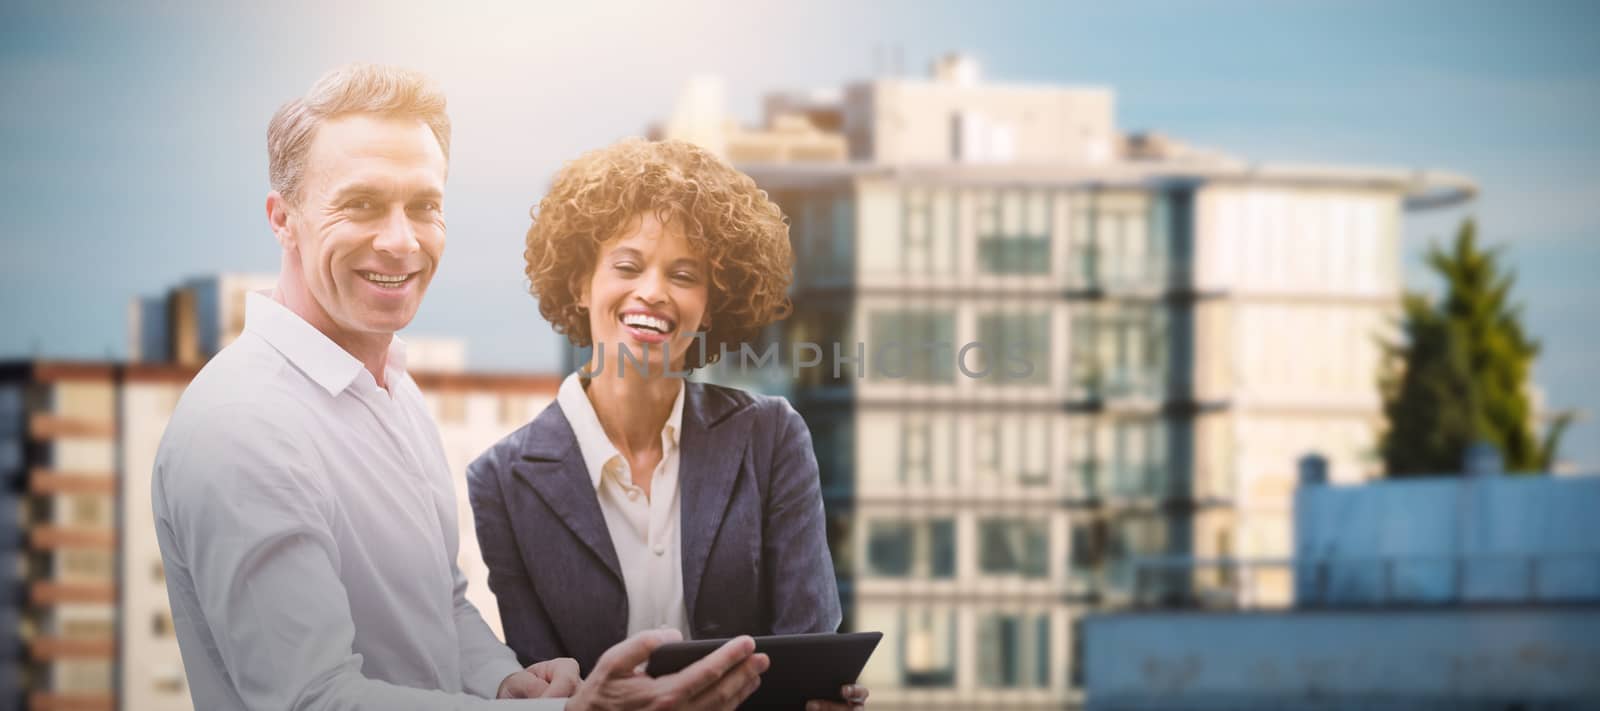 Portrait of business people posing with digital tablet  against sunlight falling on buildings against sky